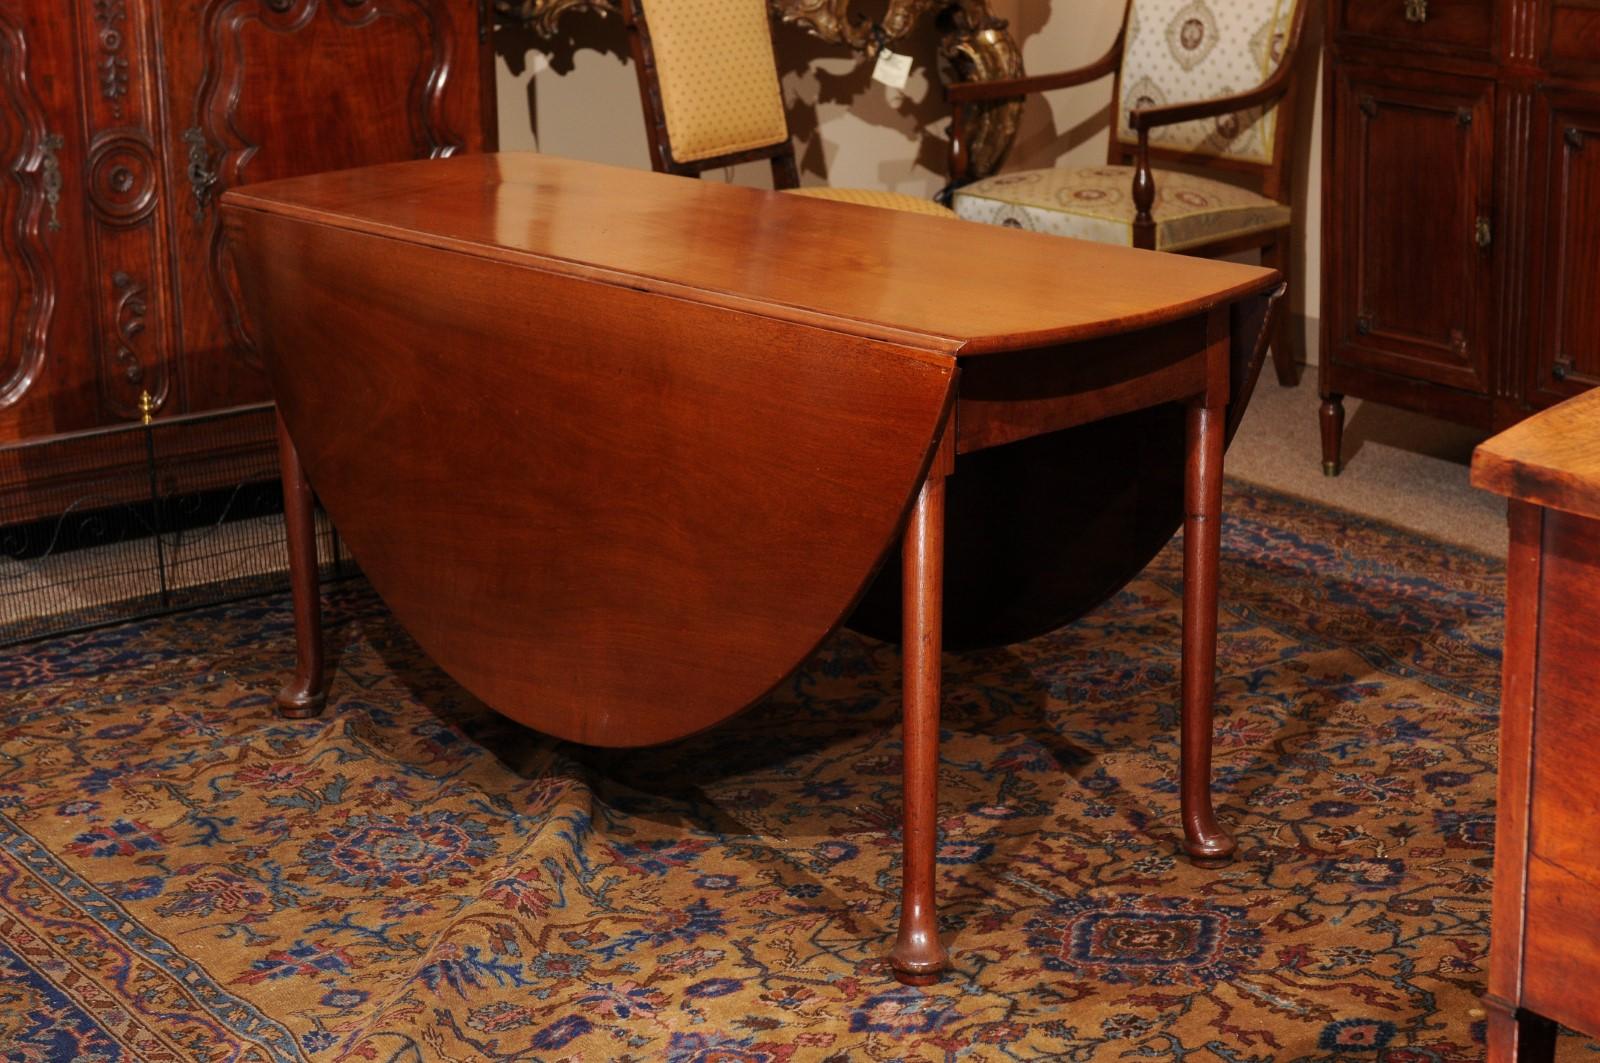  Mid-18th C English George II Mahogany Drop Leaf Oval Dining Table with Pad Feet For Sale 4